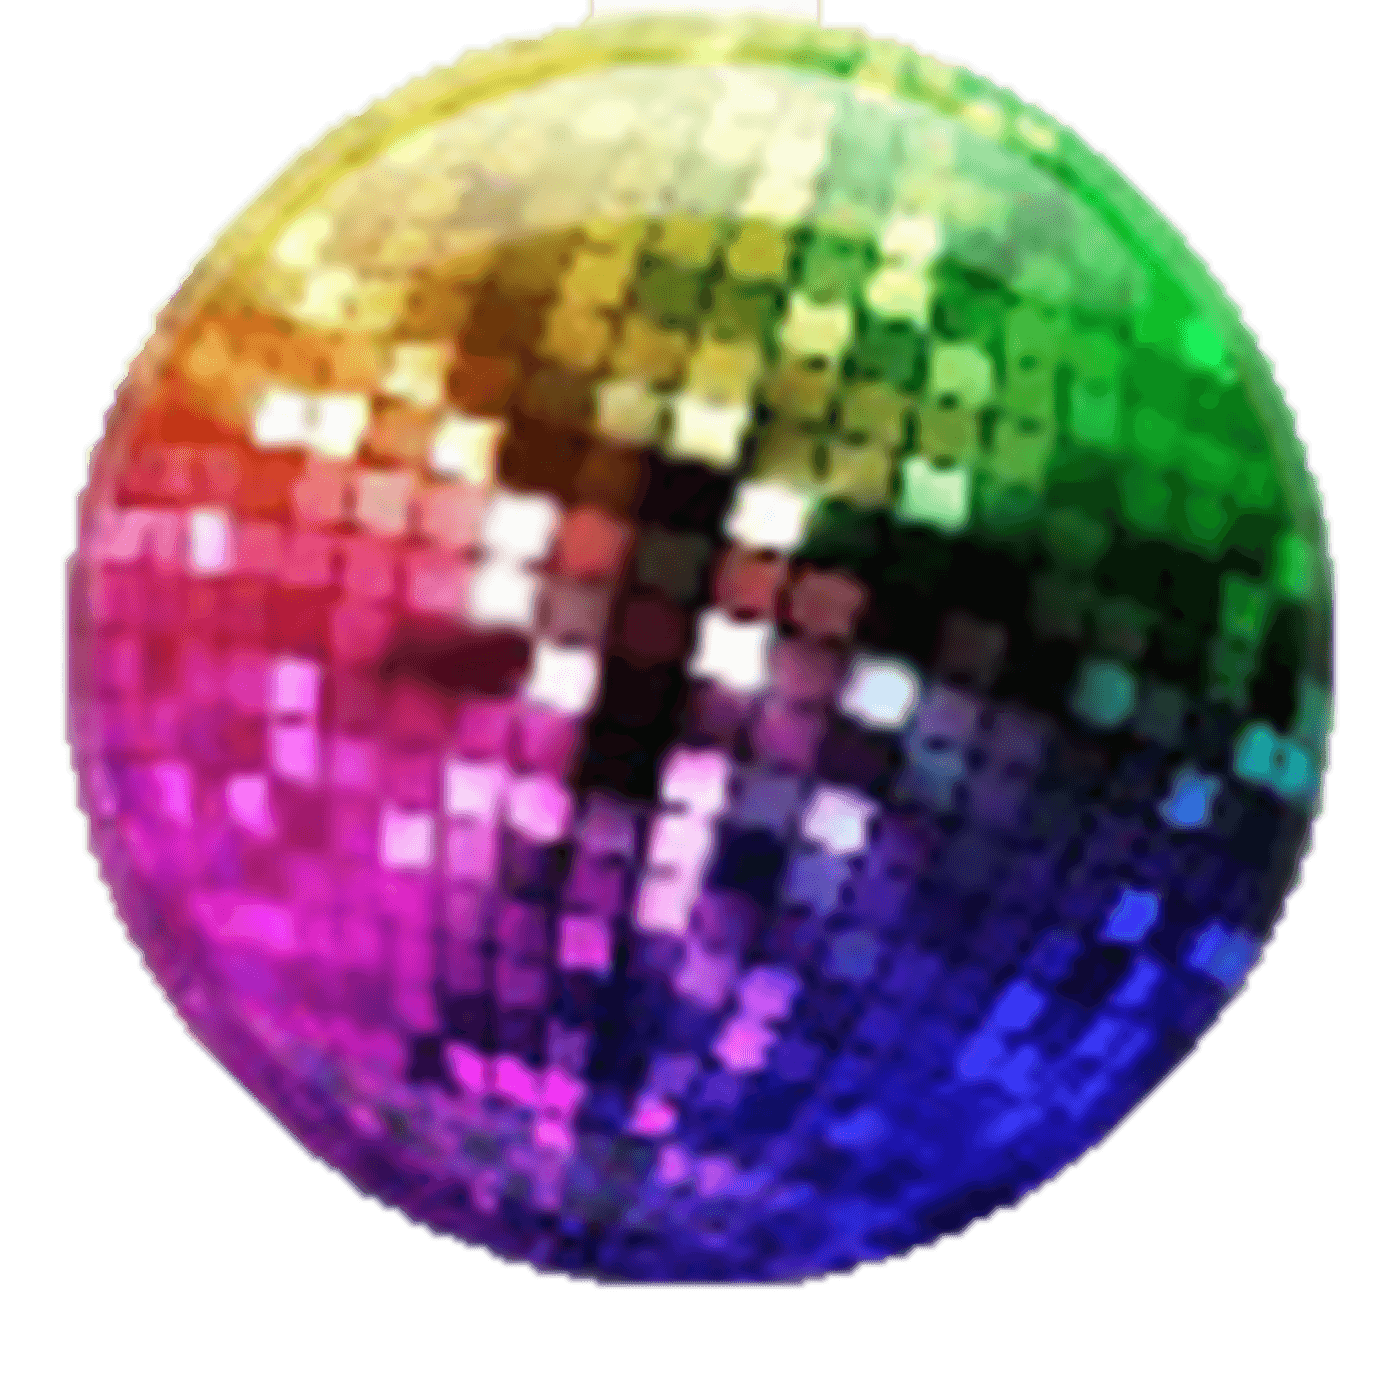 Ball image group rainbow. Record clipart disco